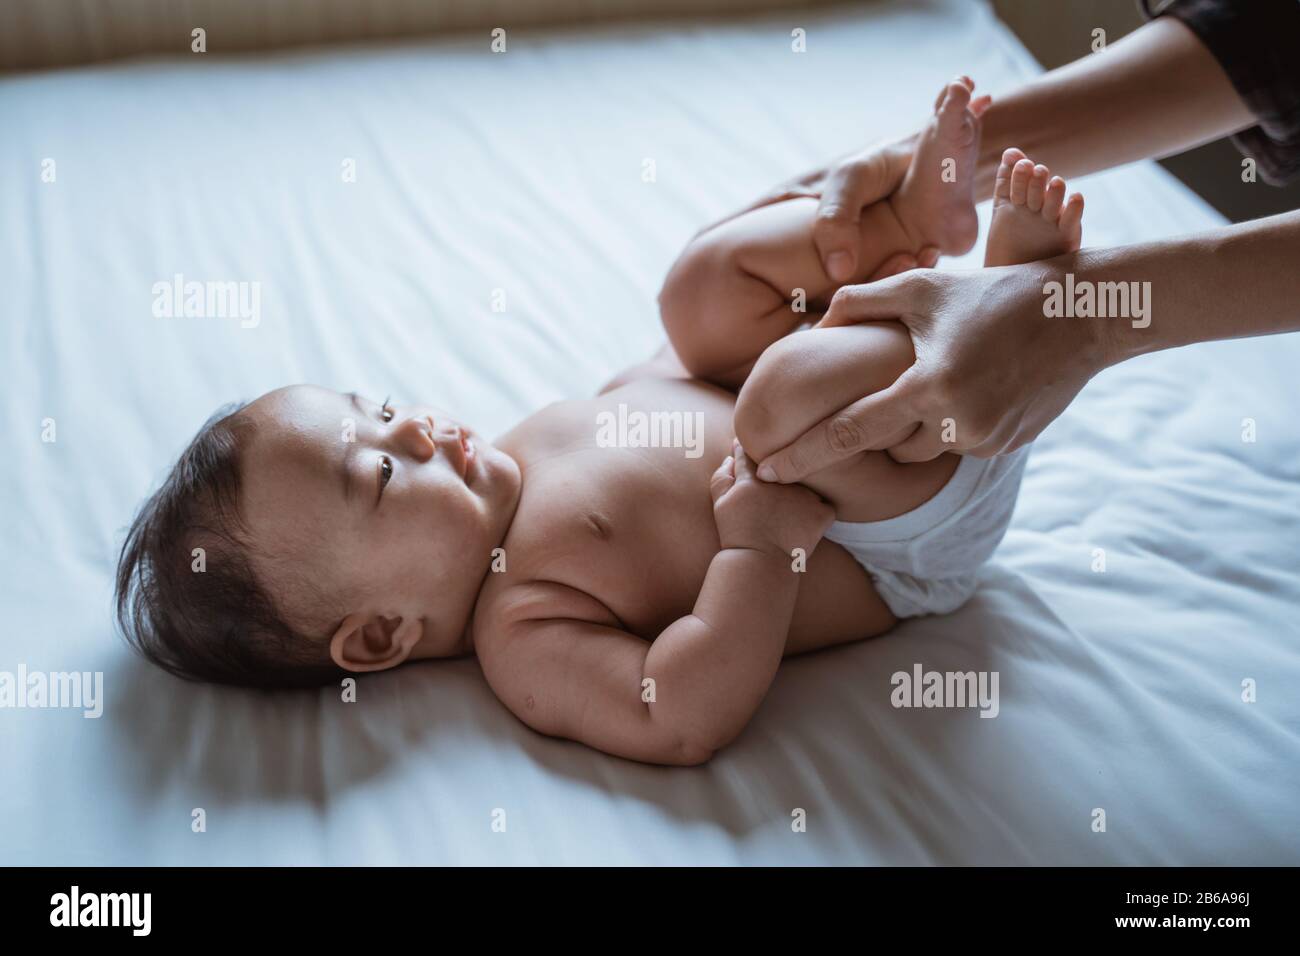 mother holds the feet of a baby child lying in bed giving massage Stock Photo